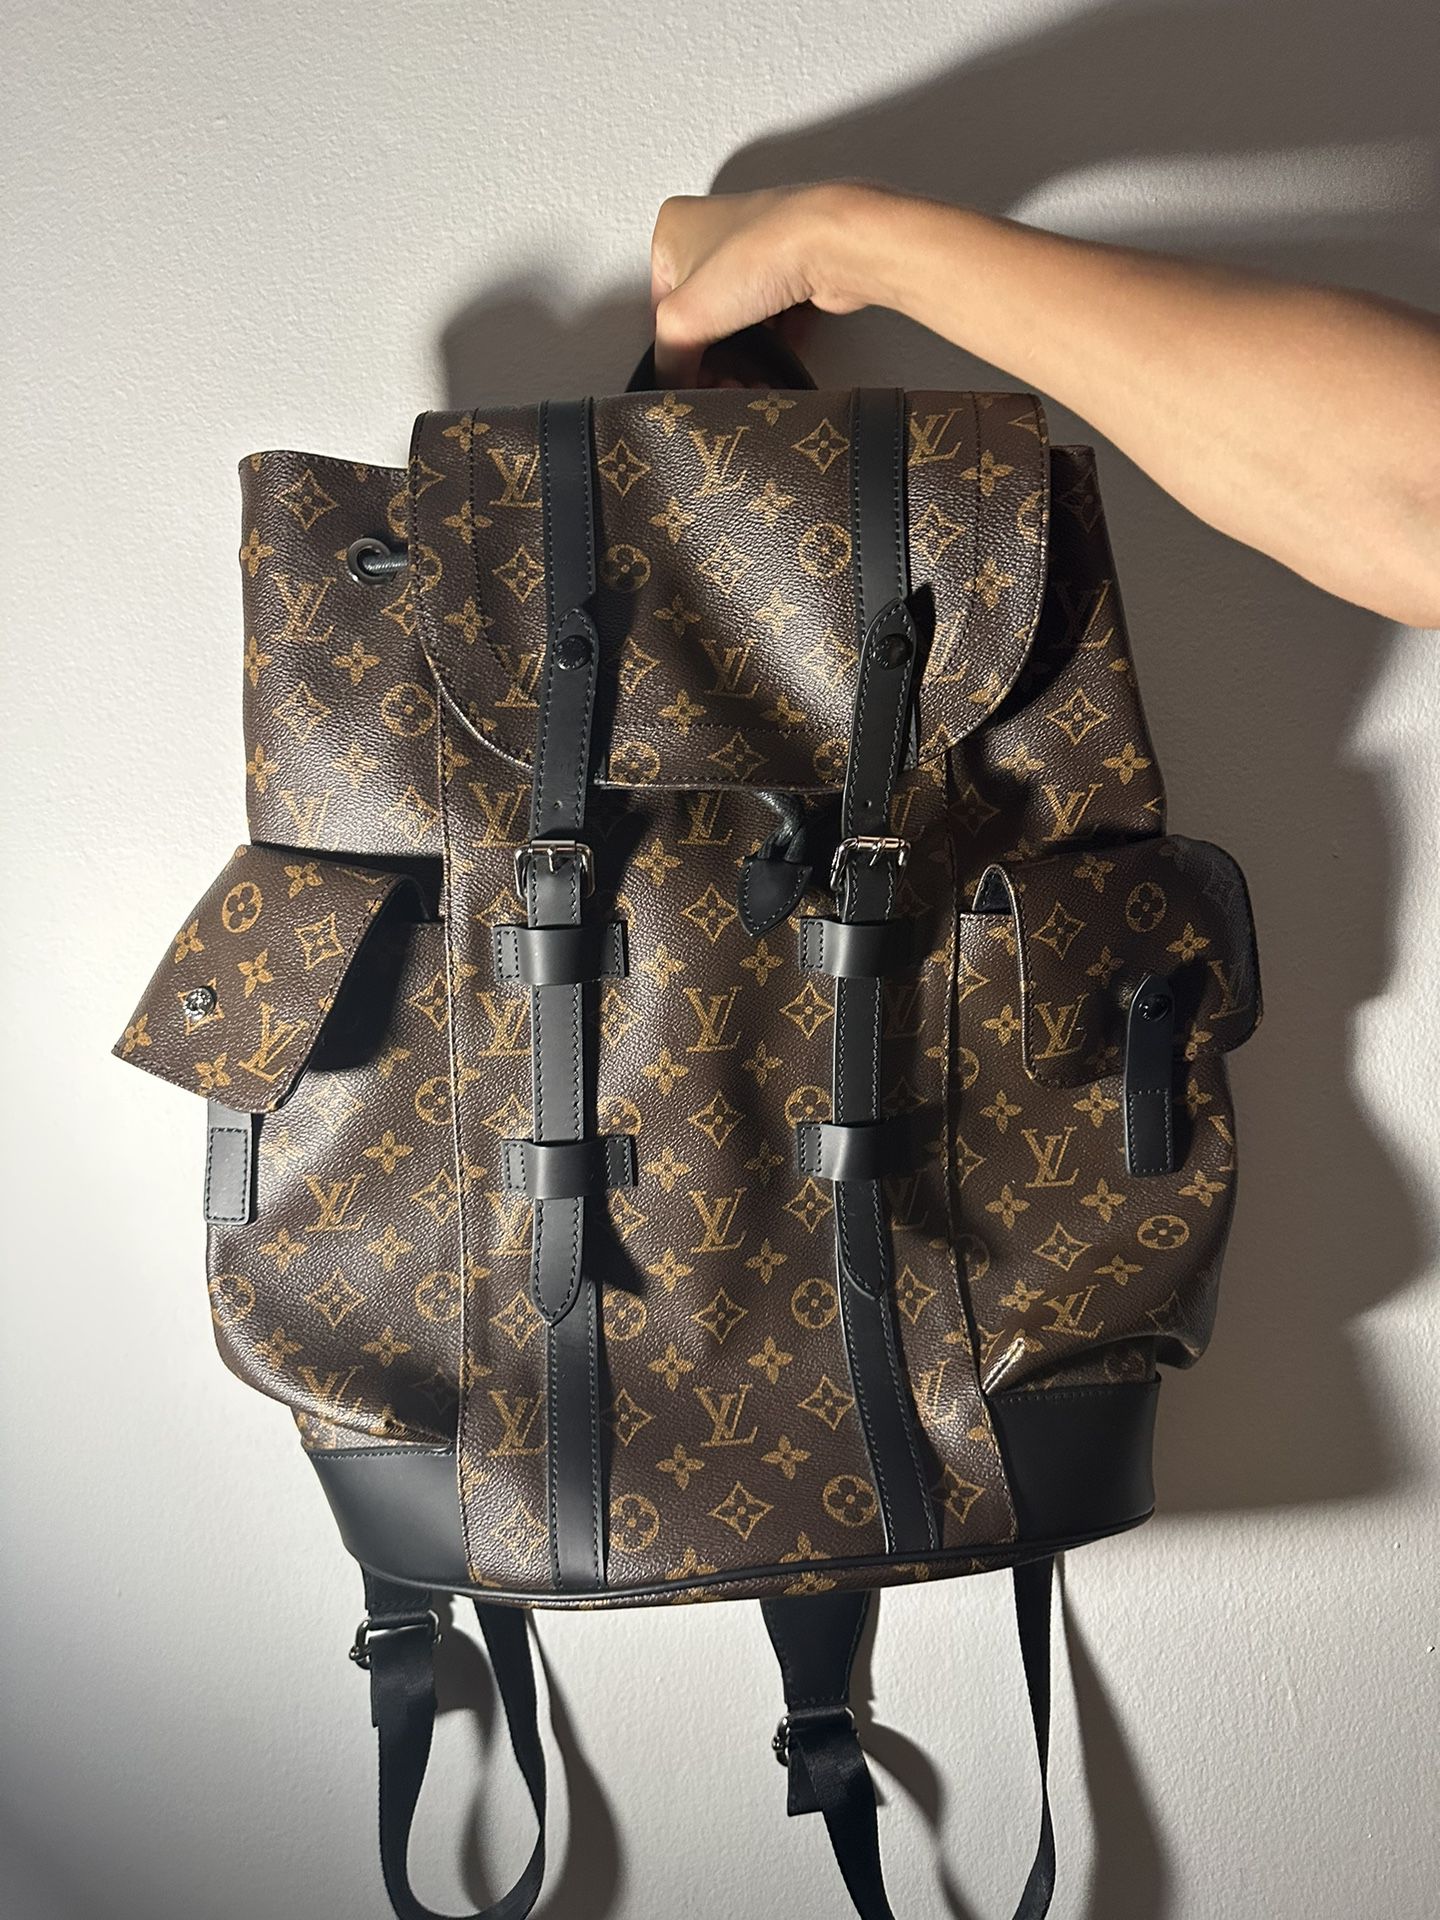 Louis Vuitton Zack Backpack bag for Sale in Renton, WA - OfferUp